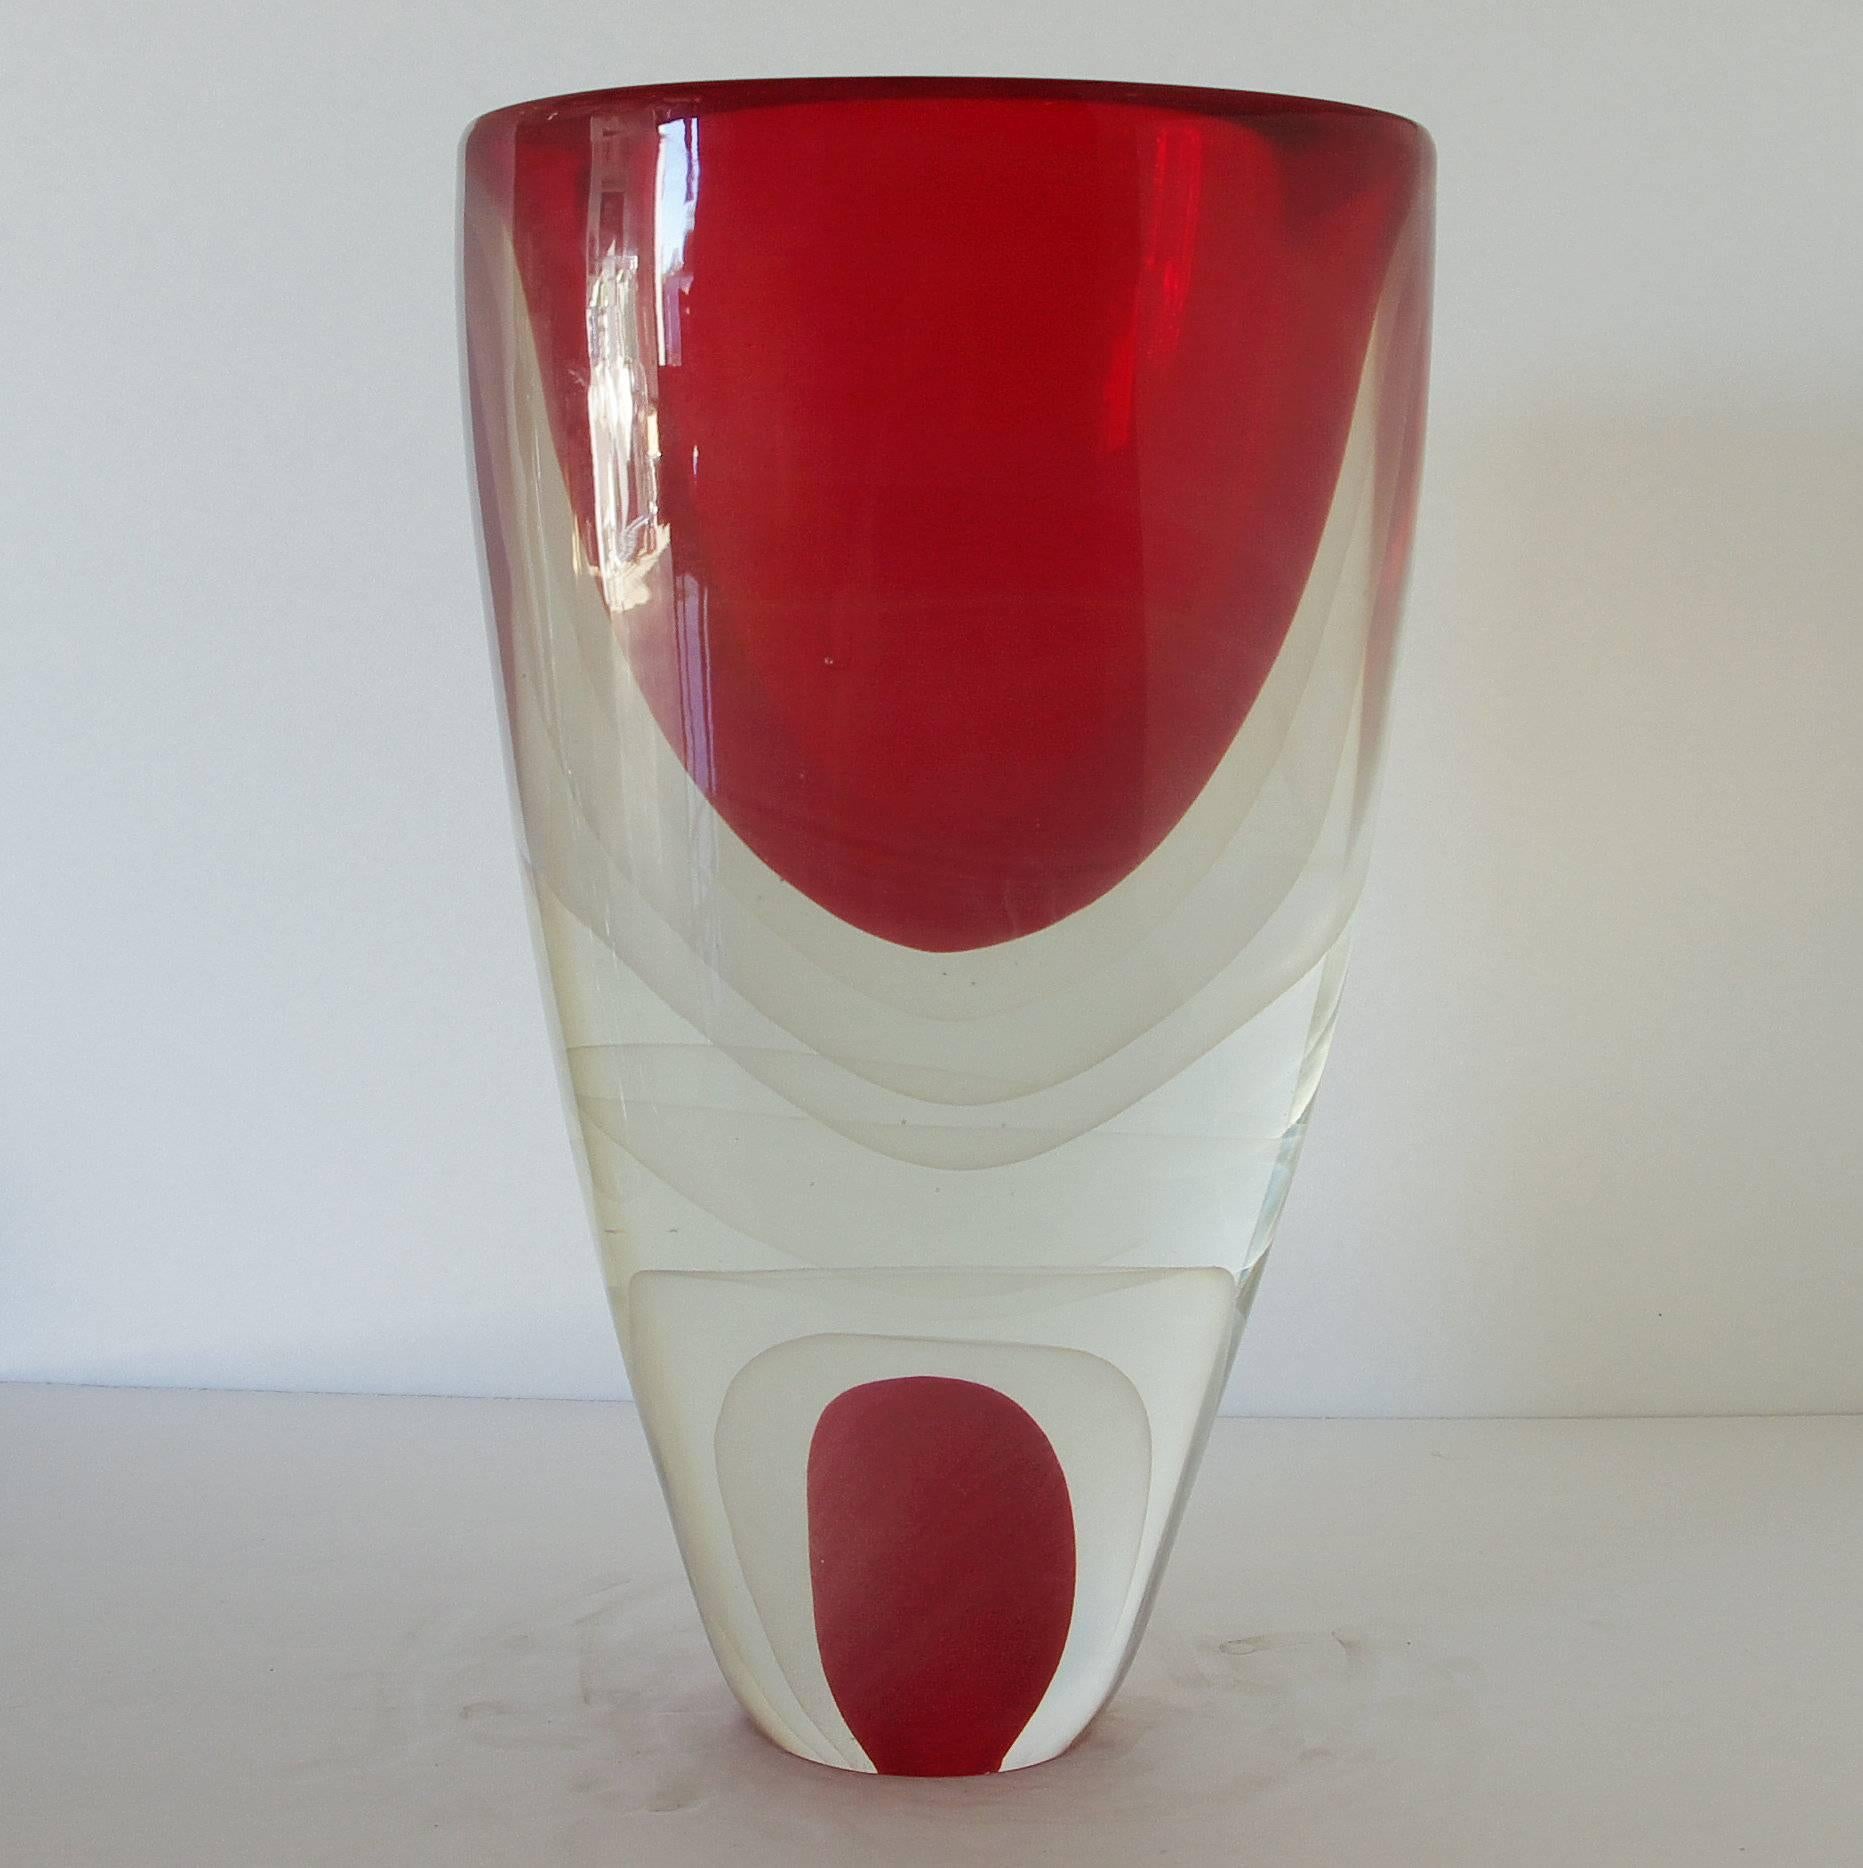 Italian vintage vase with red and clear Murano glass crafted in Sommerso or submerged technique by Romano Dona, signed 